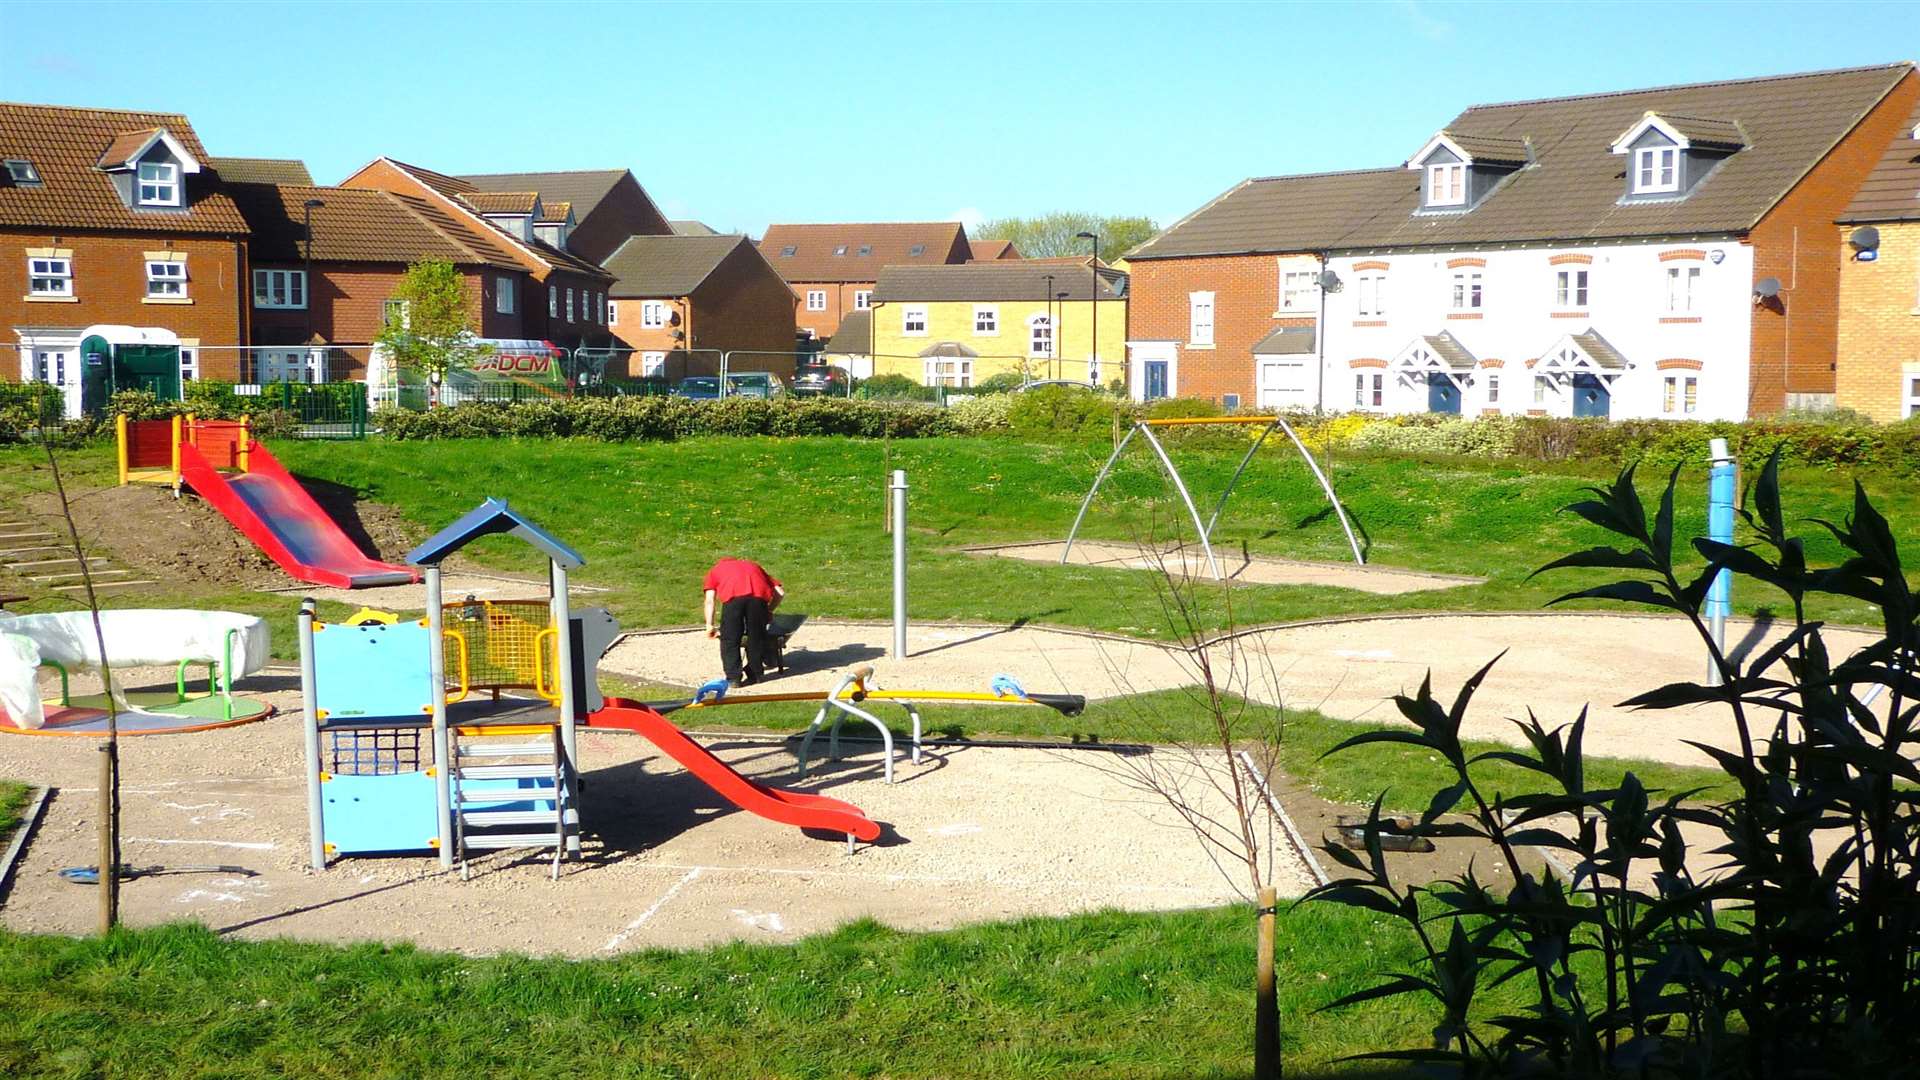 Kemsley Fields play park has been hit by vandals